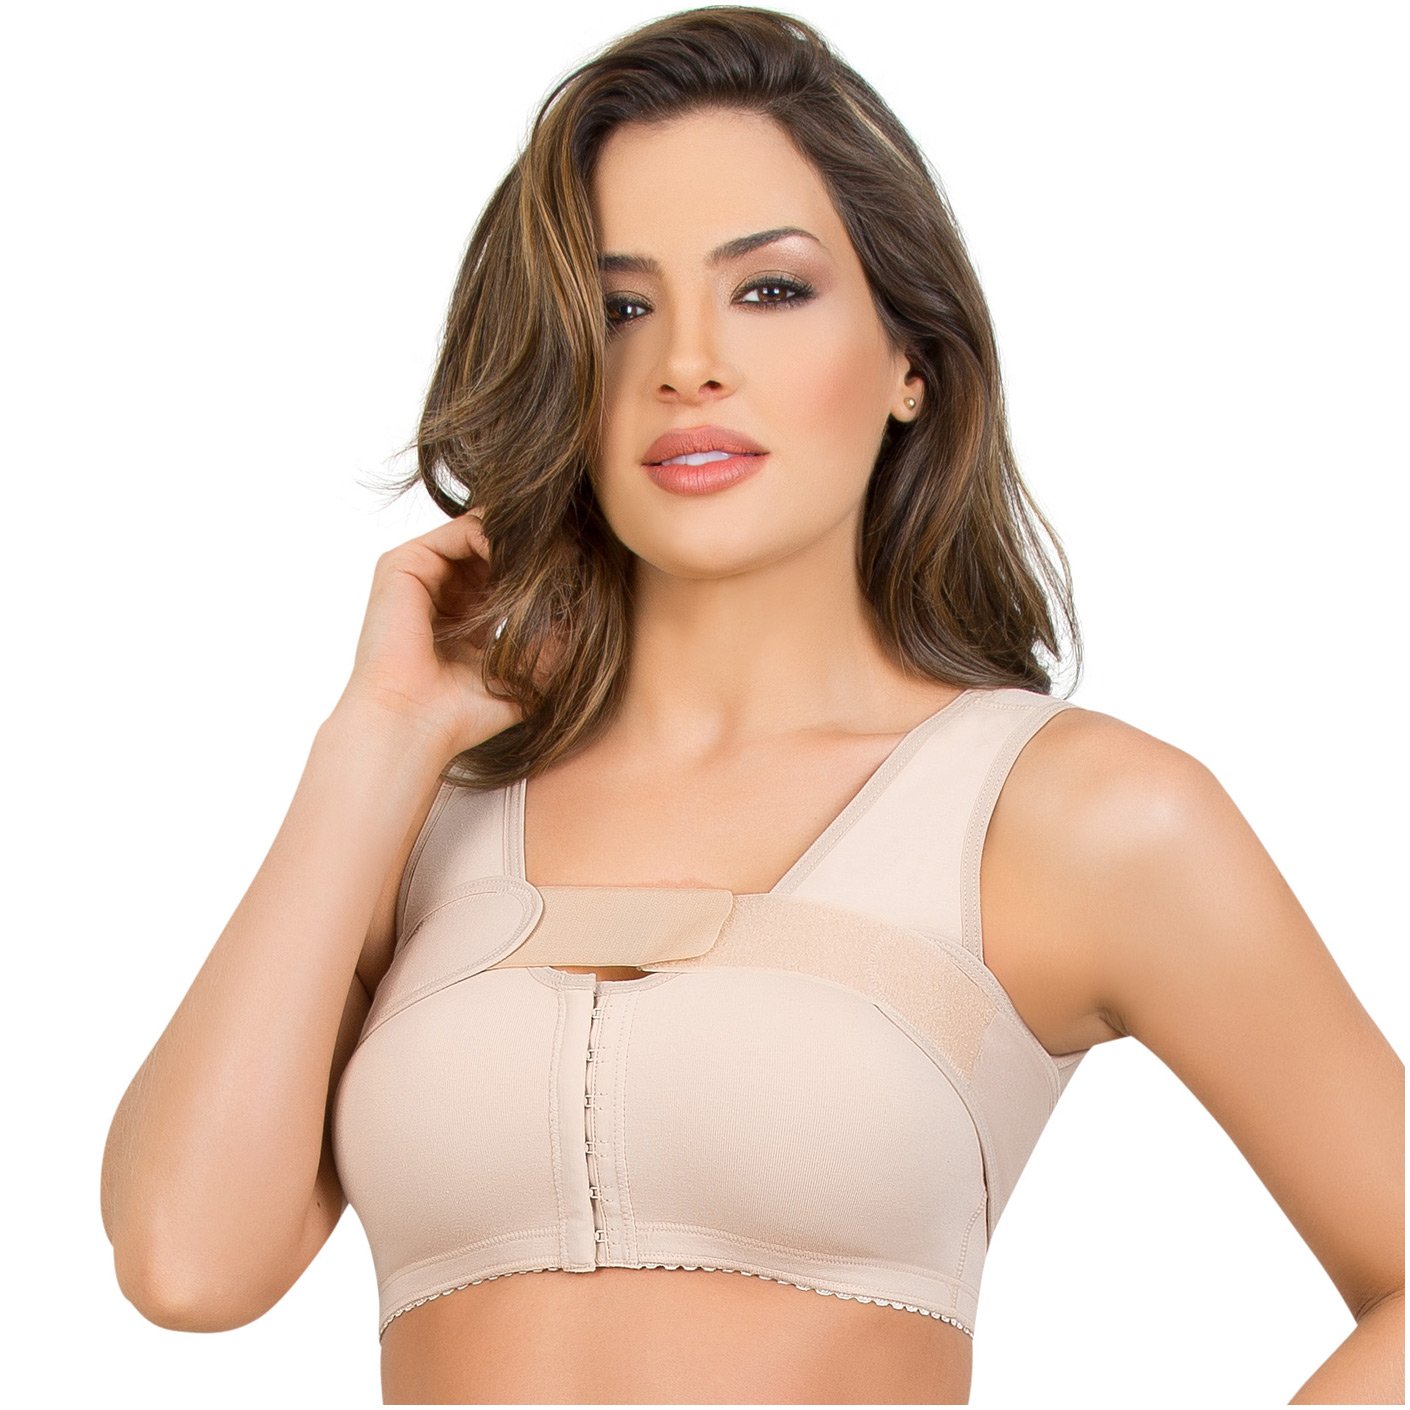 Post Surgical Liposuction Compression Bra with Implant Stabilizer